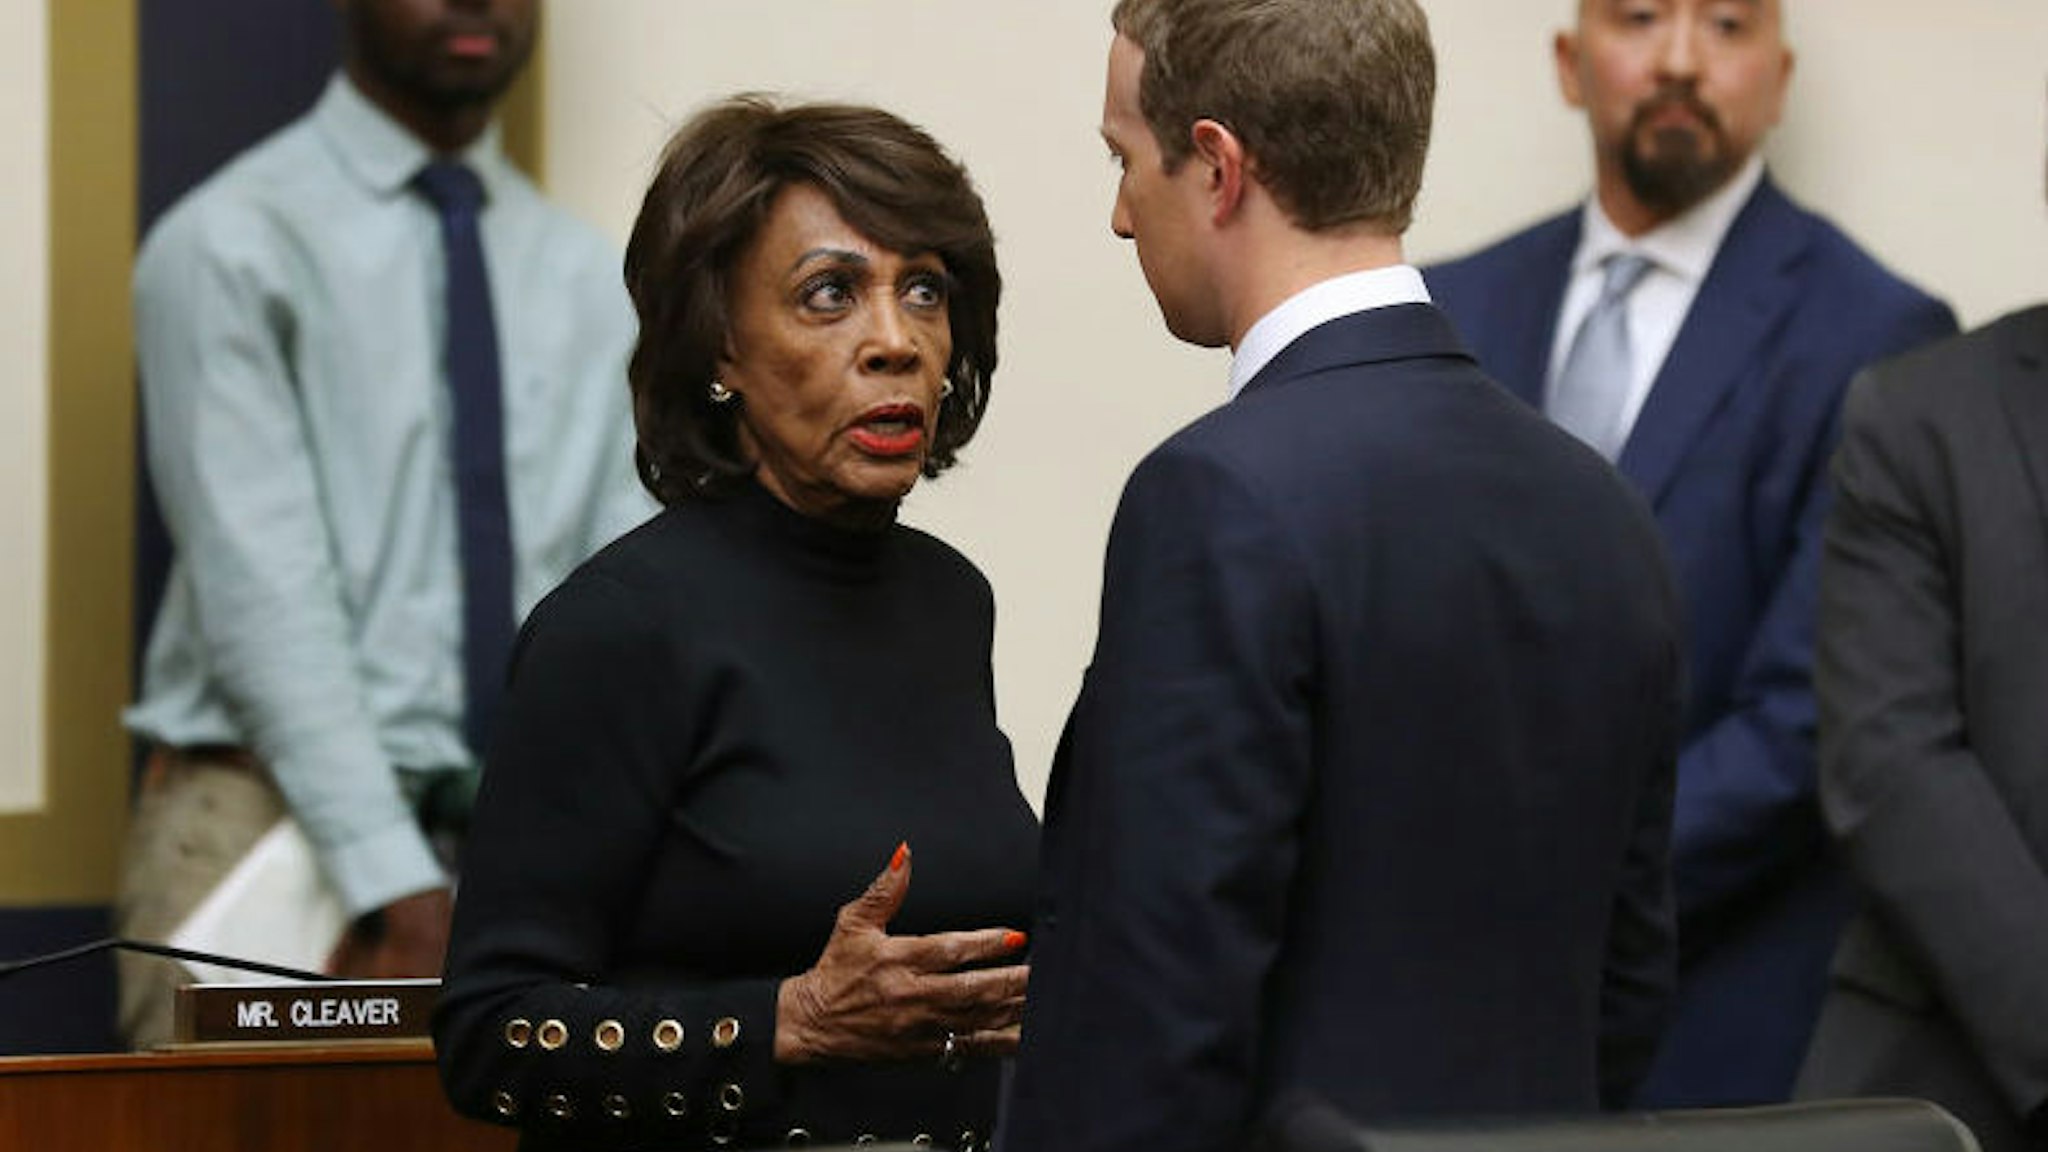 WASHINGTON, DC - OCTOBER 23: House Financial Services Committee Chair Maxine Waters (D-CA) talks with Facebook co-founder and CEO Mark Zuckerberg after he testified to the committee for six hours in the Rayburn House Office Building on Capitol Hill October 23, 2019 in Washington, DC. Zuckerberg testified about Facebook's proposed cryptocurrency Libra, how his company will handle false and misleading information by political leaders during the 2020 campaign and how it handles its users‚Äô data and privacy.